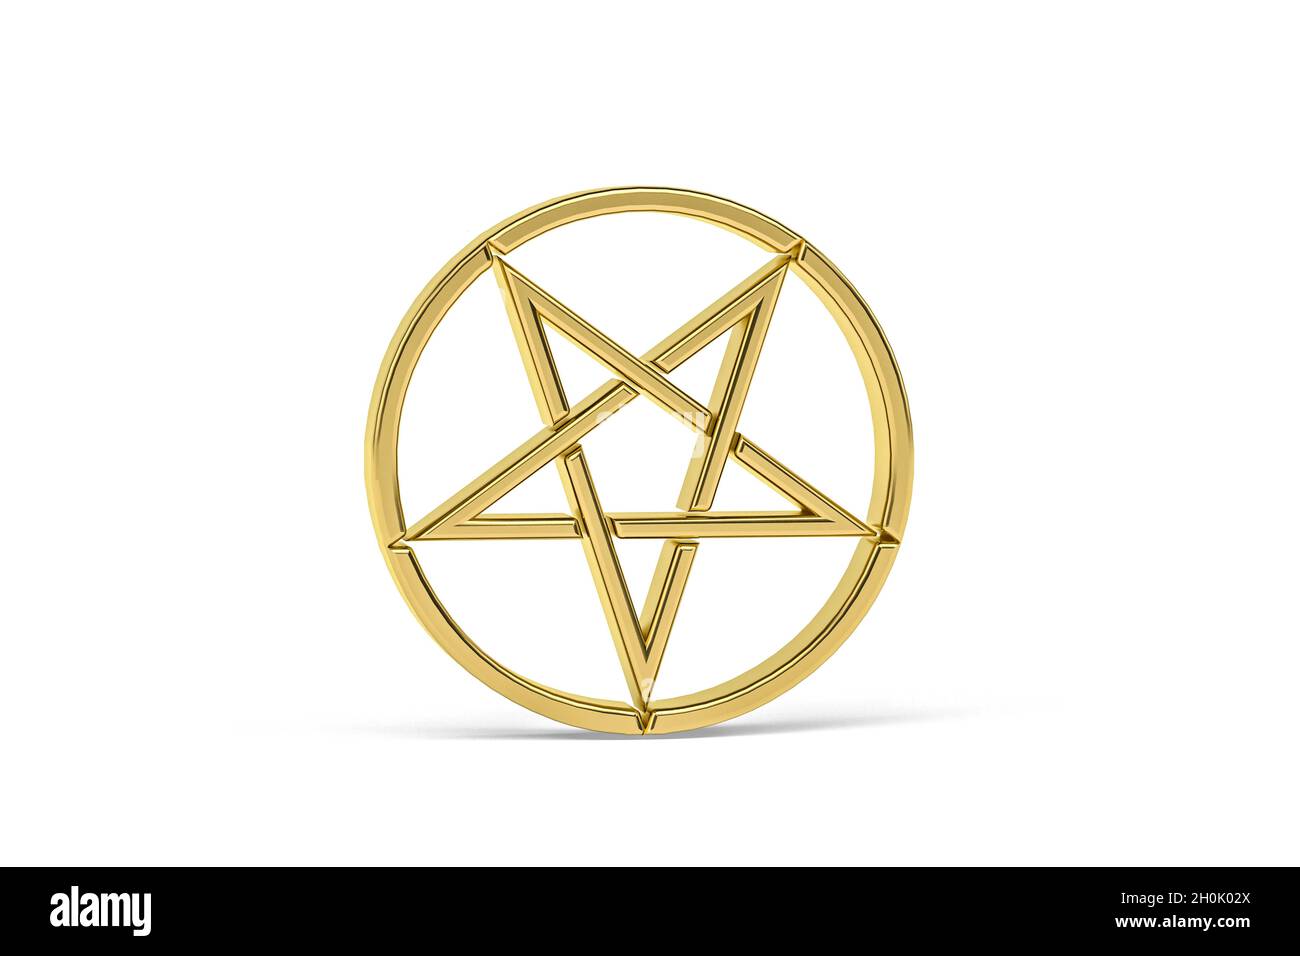 Golden satanism icon isolated on white background - 3D render Stock Photo